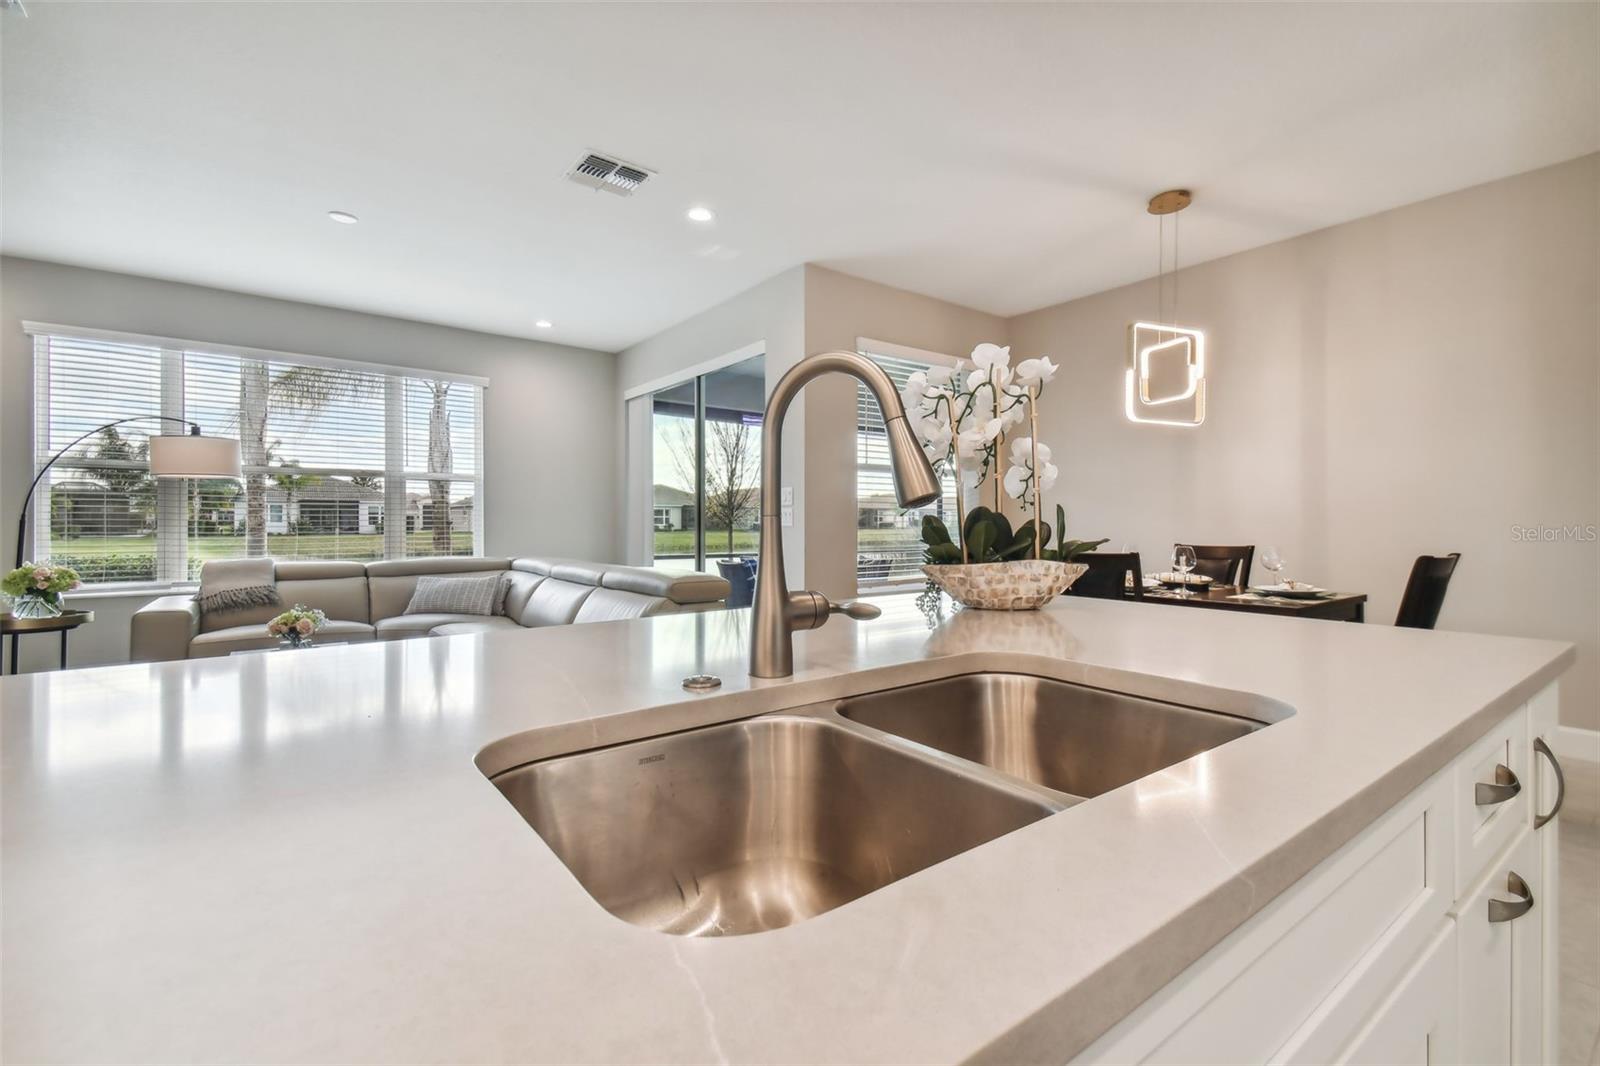 50/50 stainless steel sink with quartz countertop.